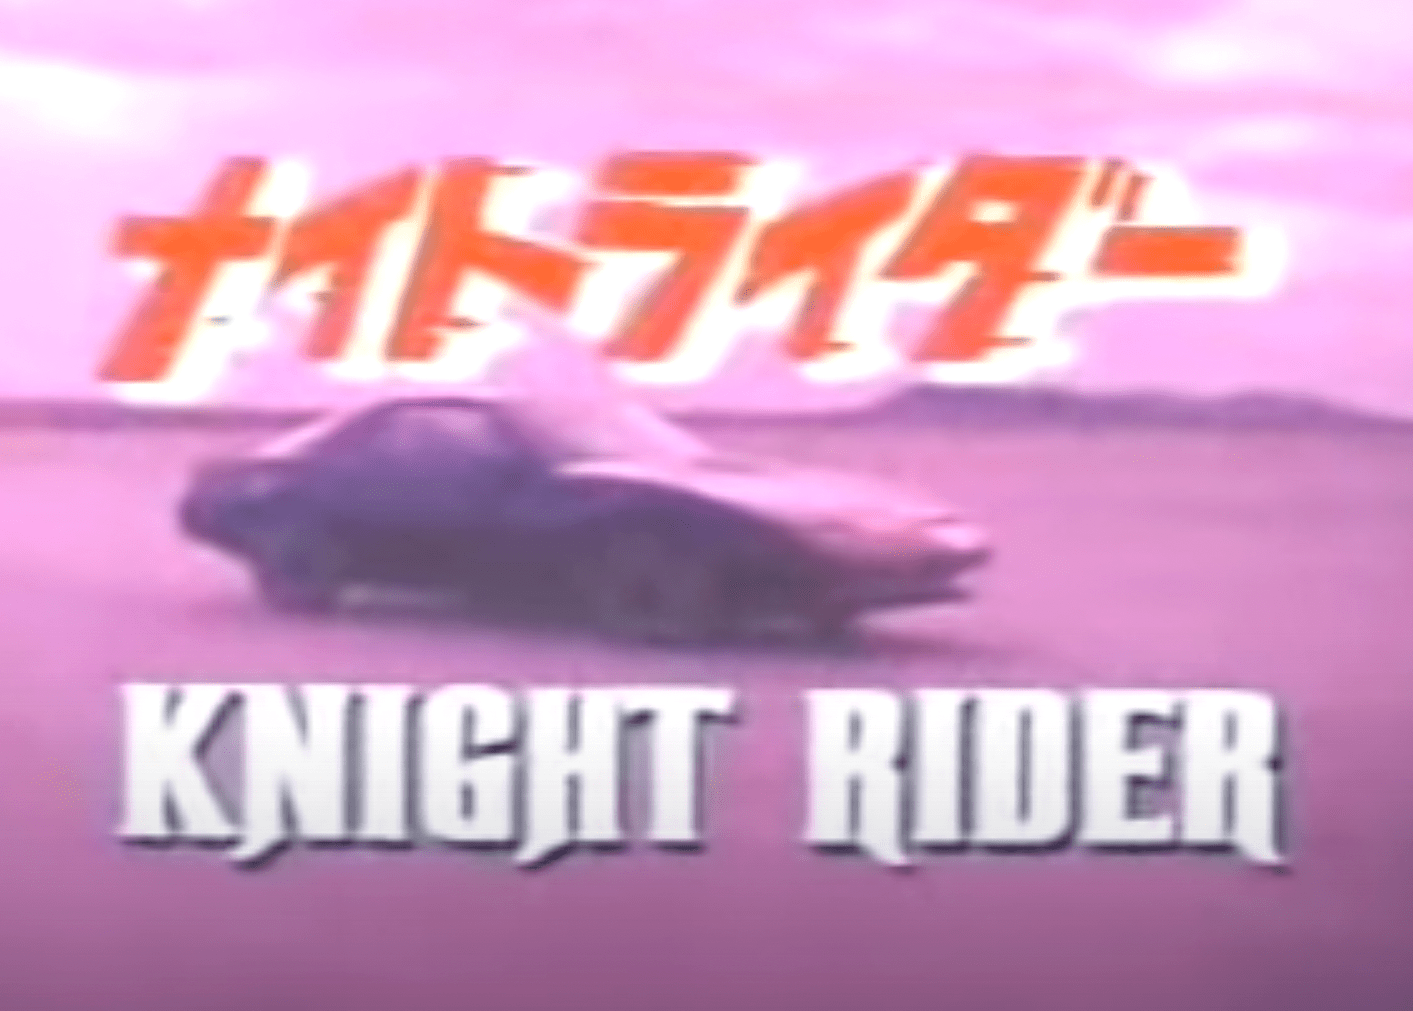 Knight Rider Intro in Japanese